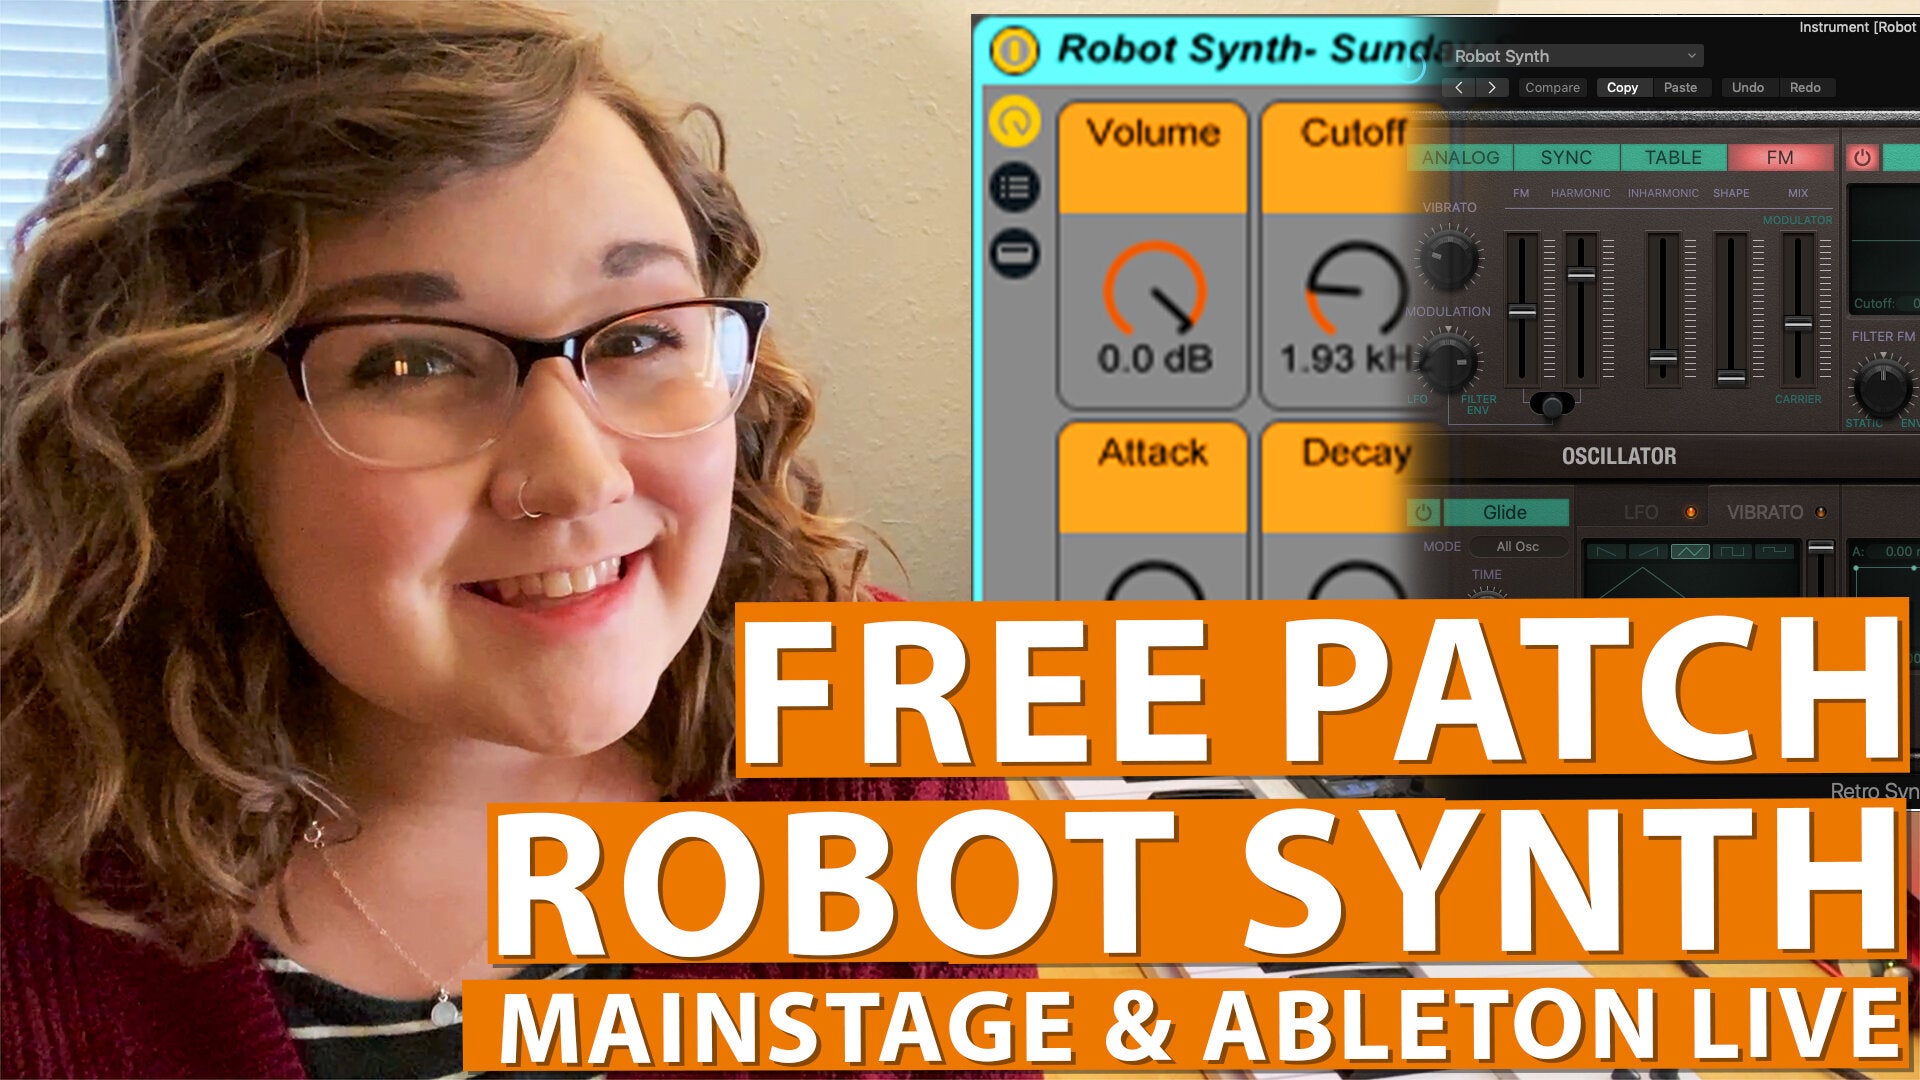 Free MainStage & Ableton Worship Patch! - Robot Synth